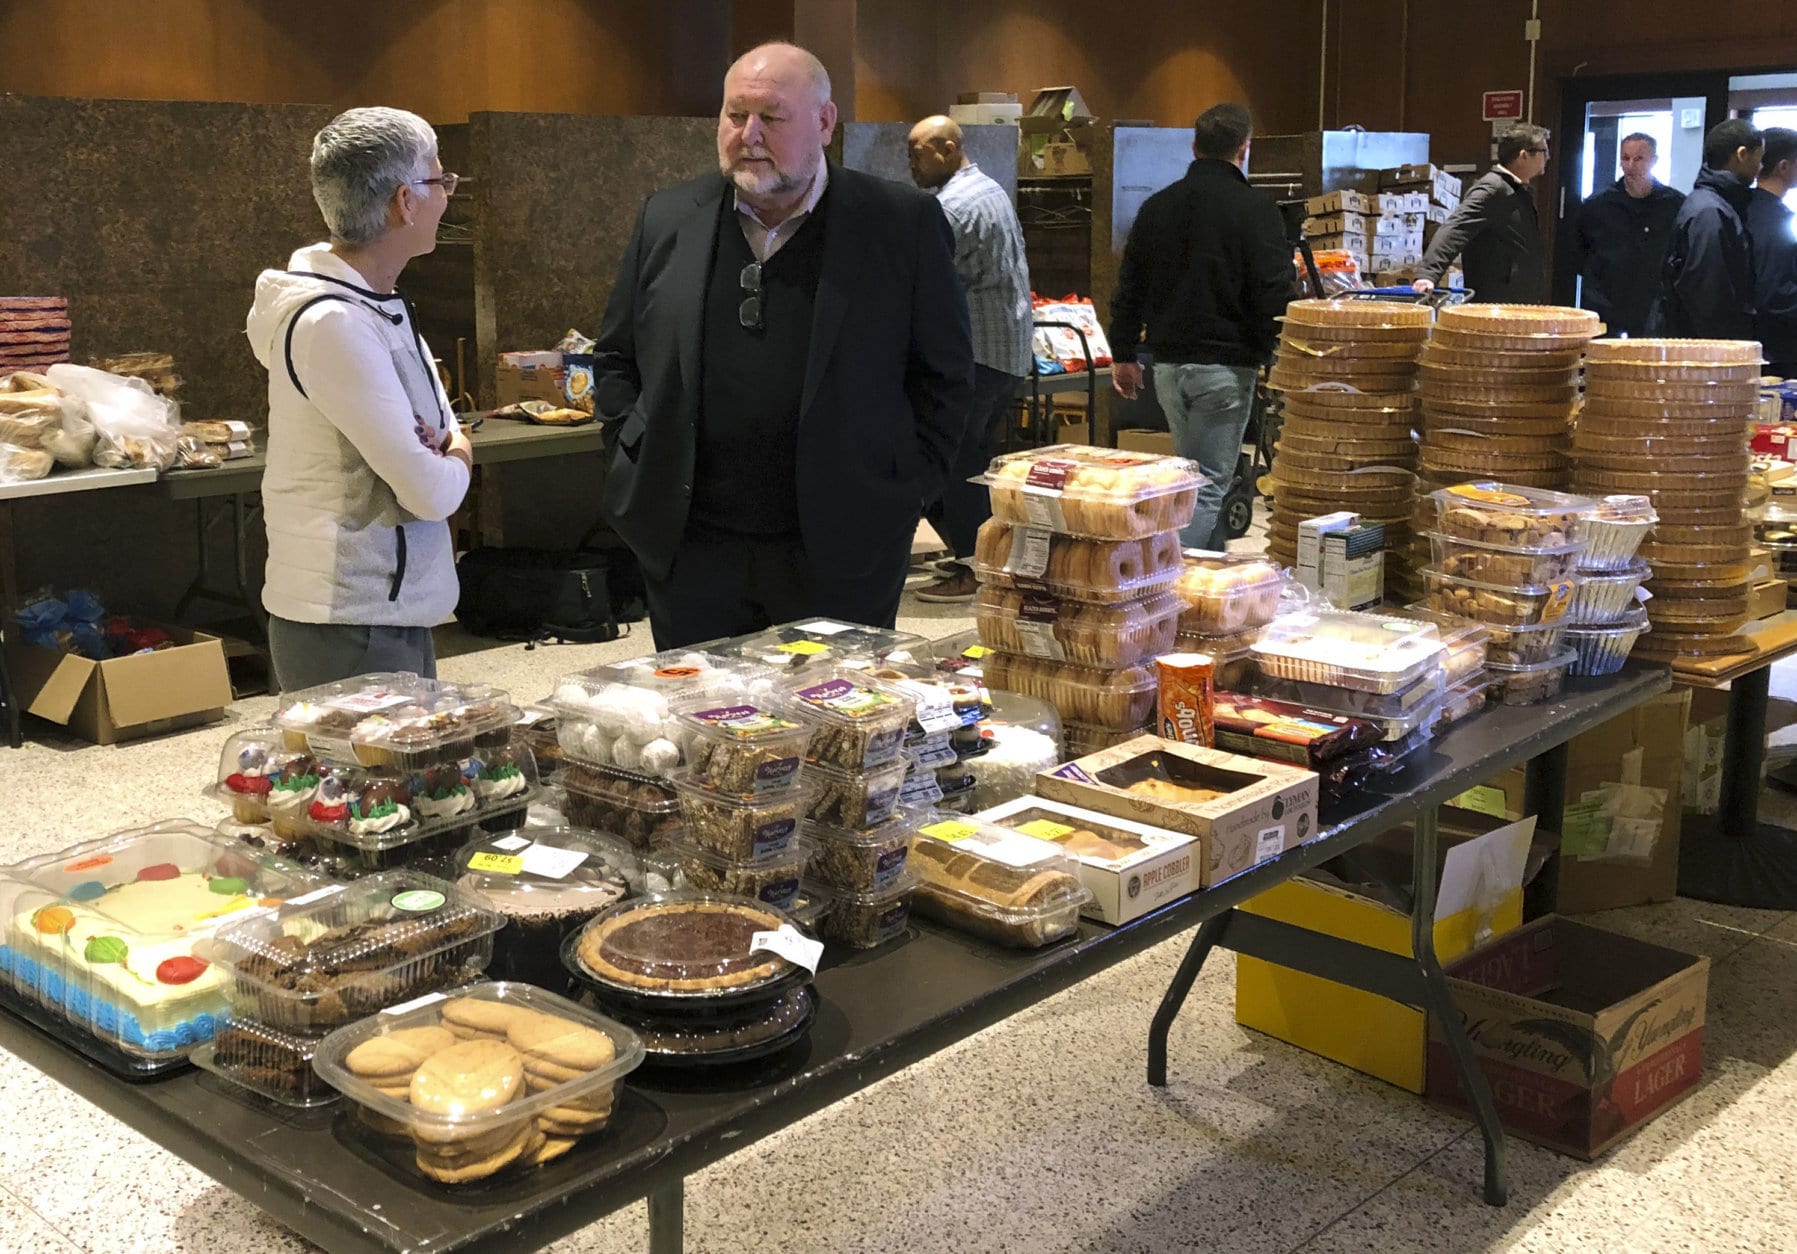 In this Thursday, Jan. 17, 2019 photo, retired U.S. Coast Guard Adm. Thad Allen, center, speaks with Felicitas Rendon, wife of Rear Adm. James E. Rendon, superintendent of the Coast Guard Academy in New London, Conn. Allen was visiting a pop-up food pantry created at a school to help hundreds of civilian and non-civilian Coast Guard employees affected by the partial federal government shutdown. Allen called the shutdown a "wound" that's been inflicted "by our own government." (AP Photo/Susan Haigh)